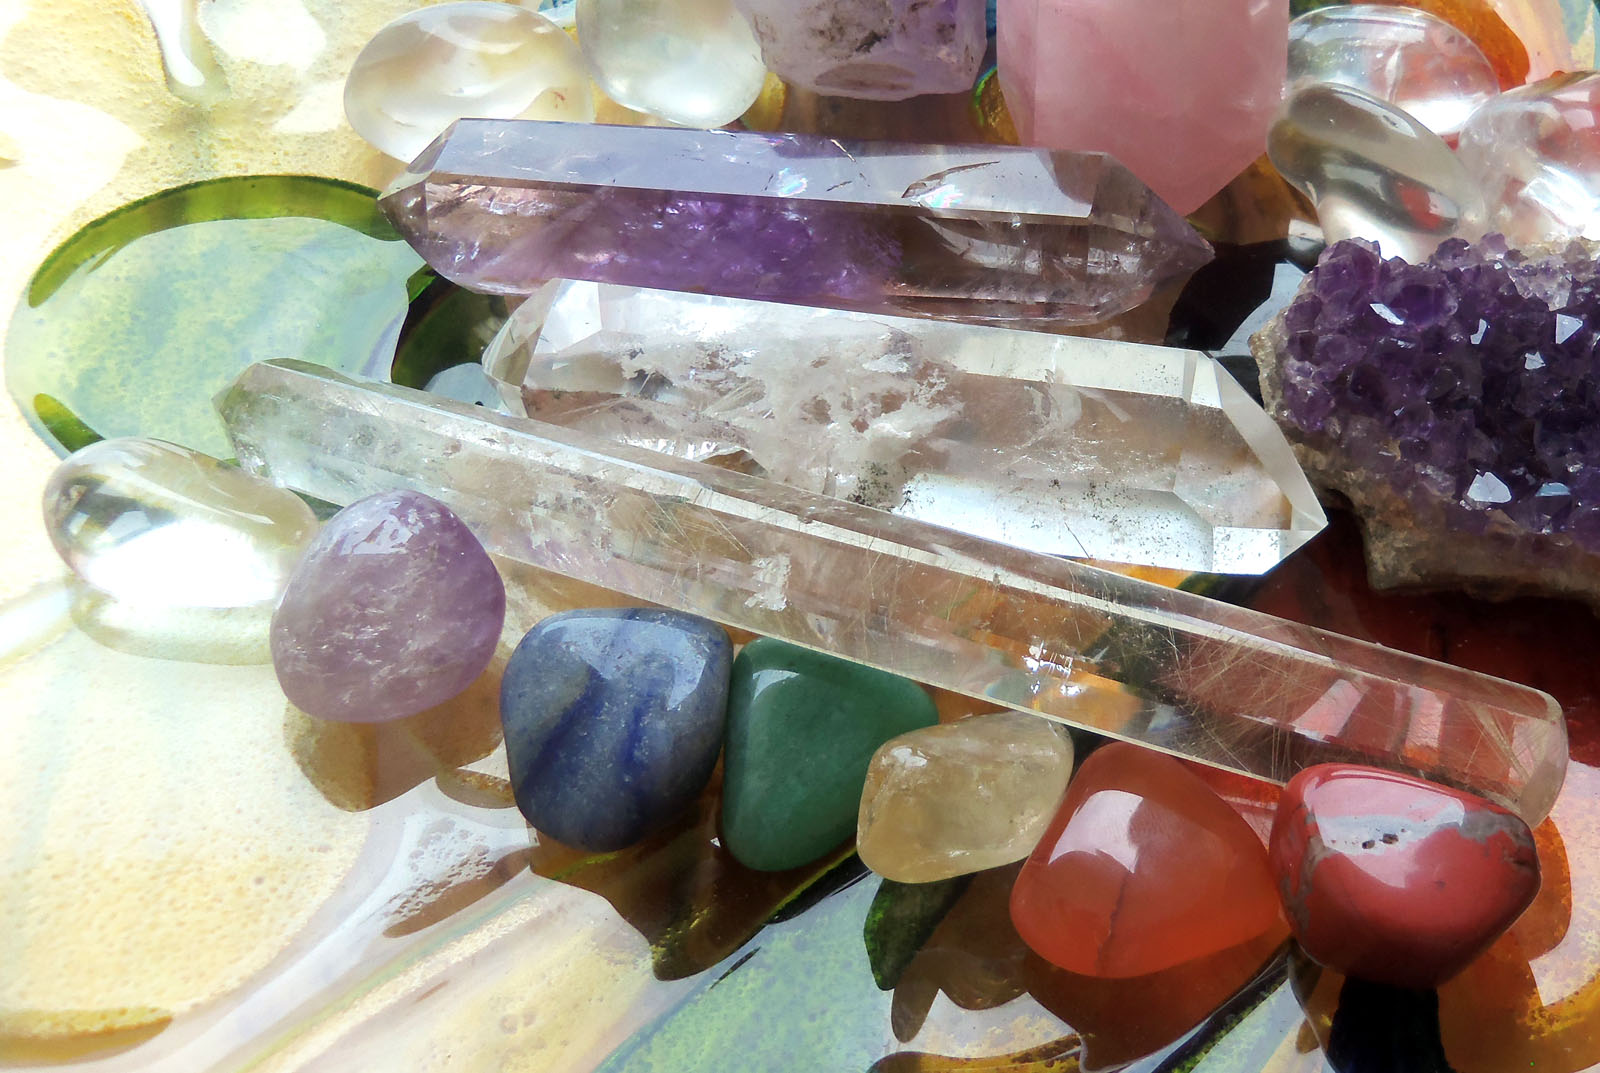 21 Must-Have Crystals for Meditation